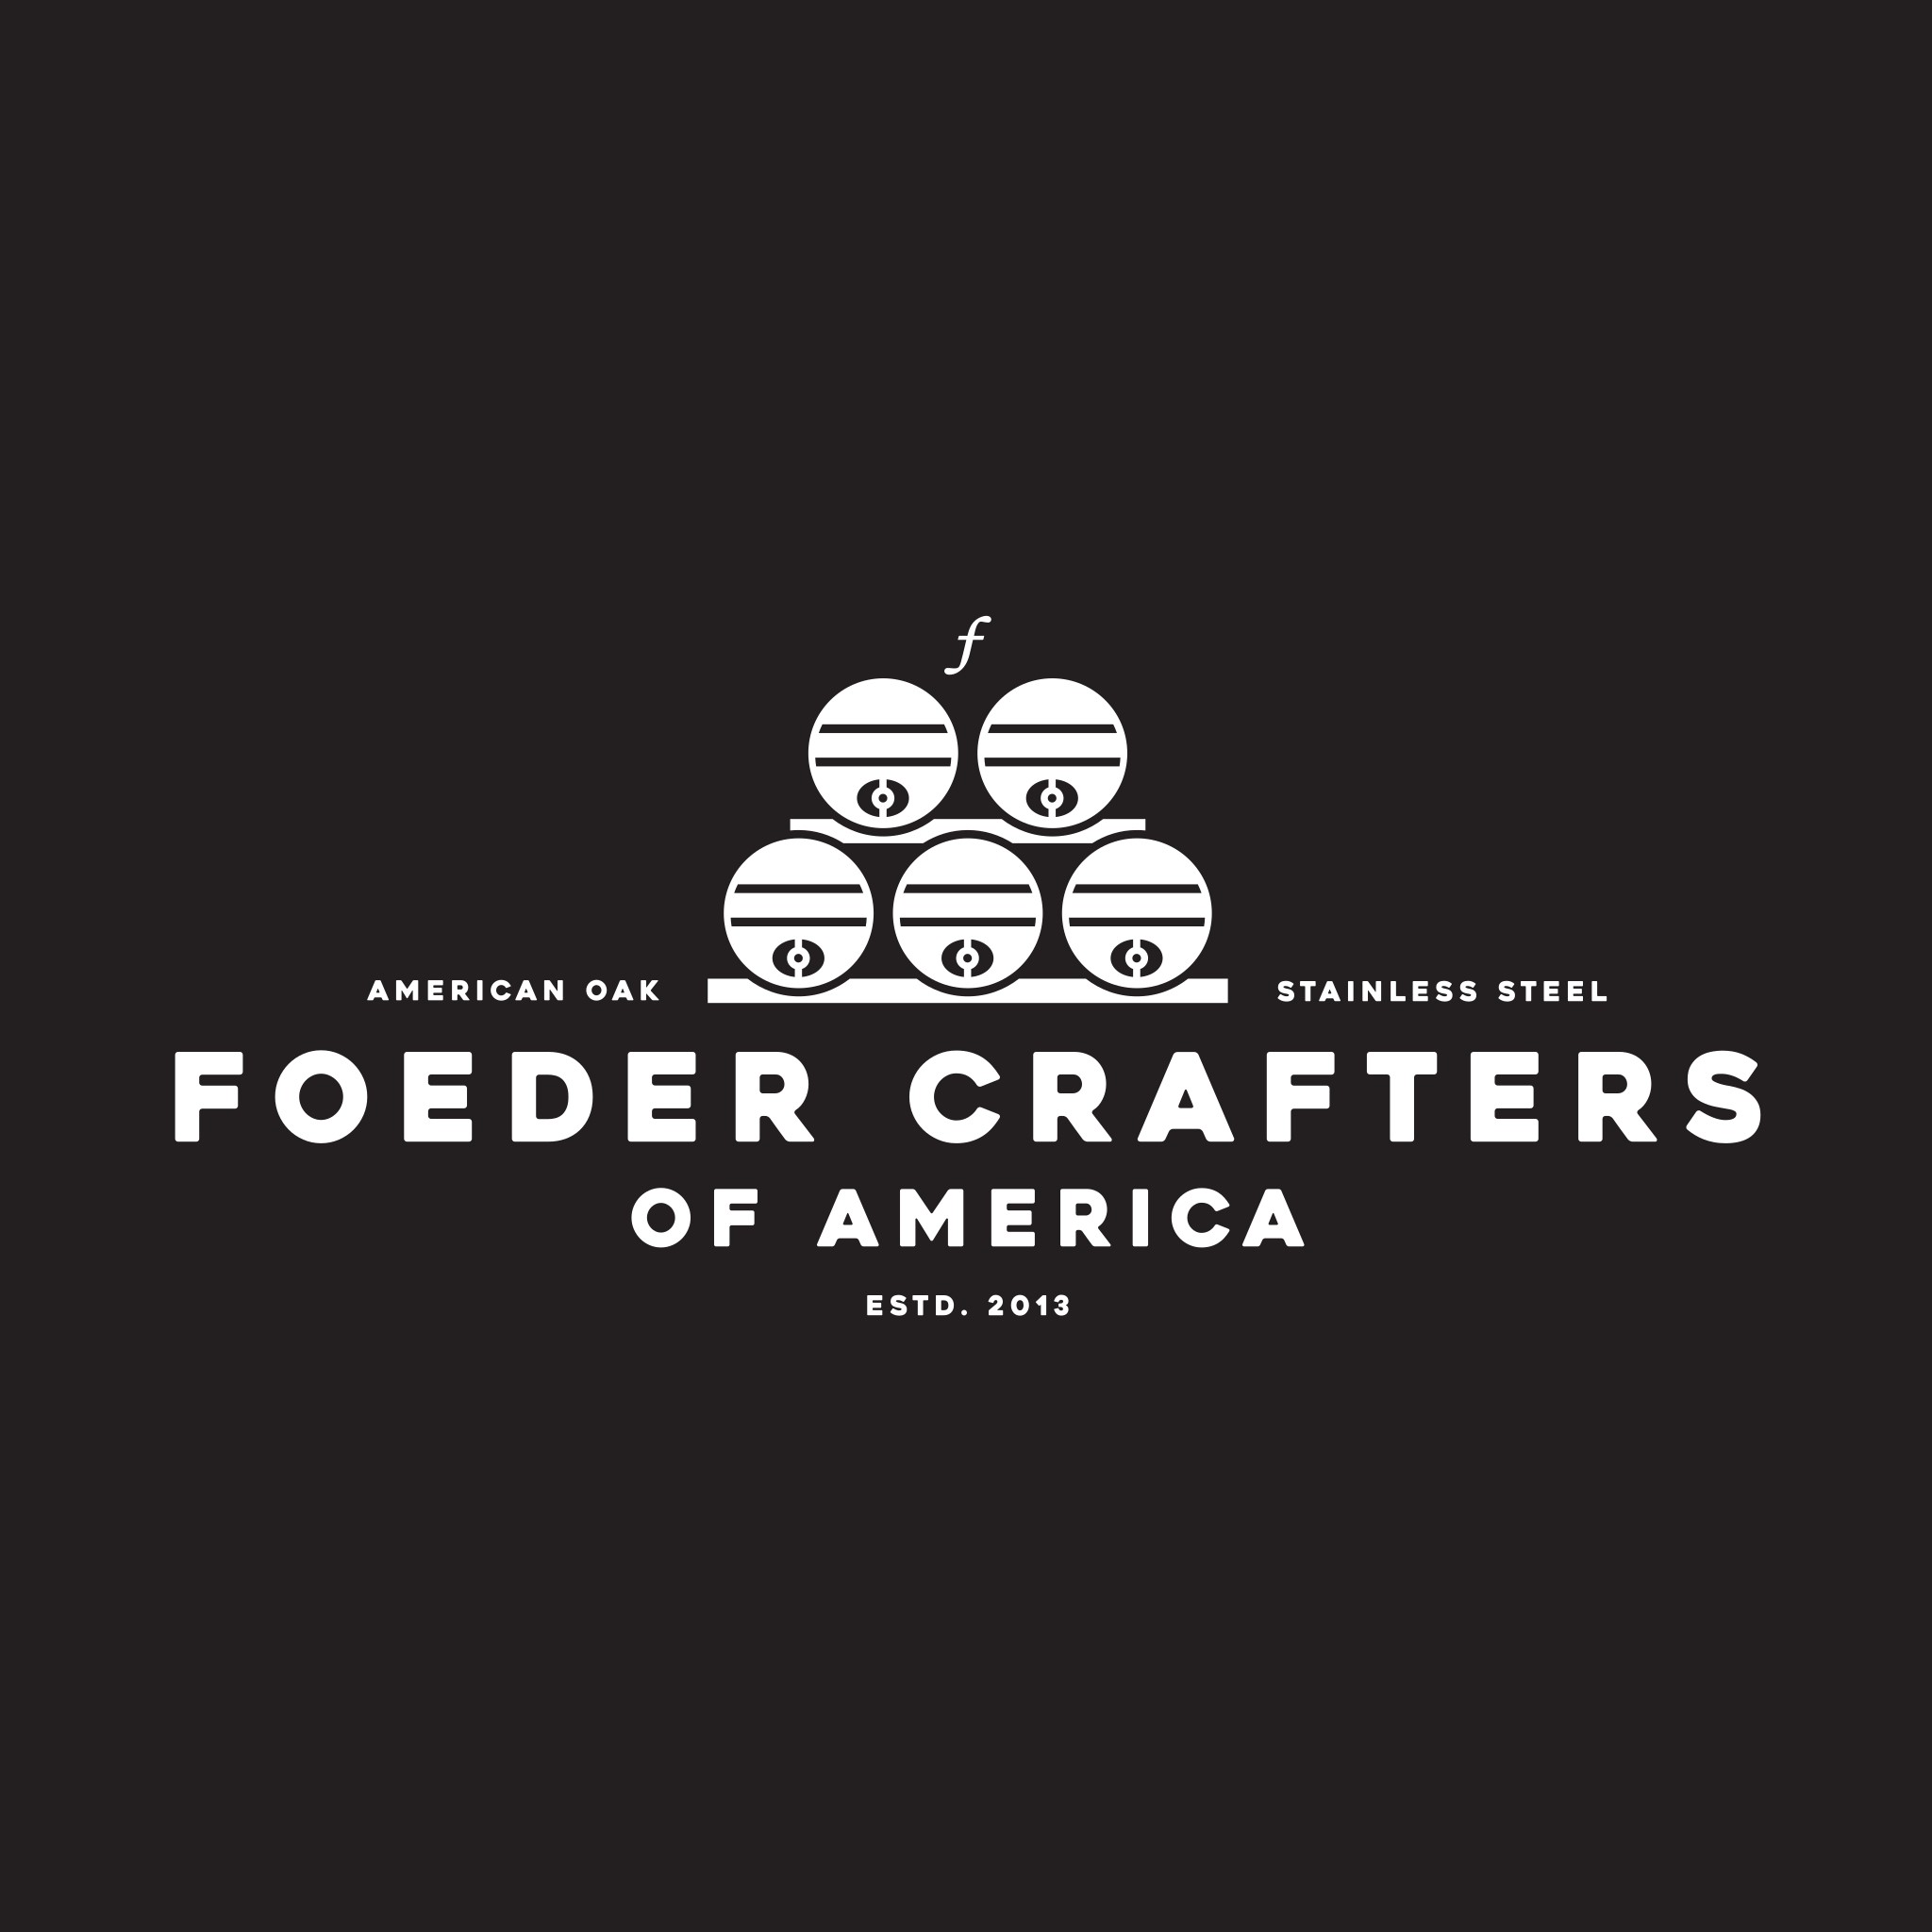 Foeder Crafters of America